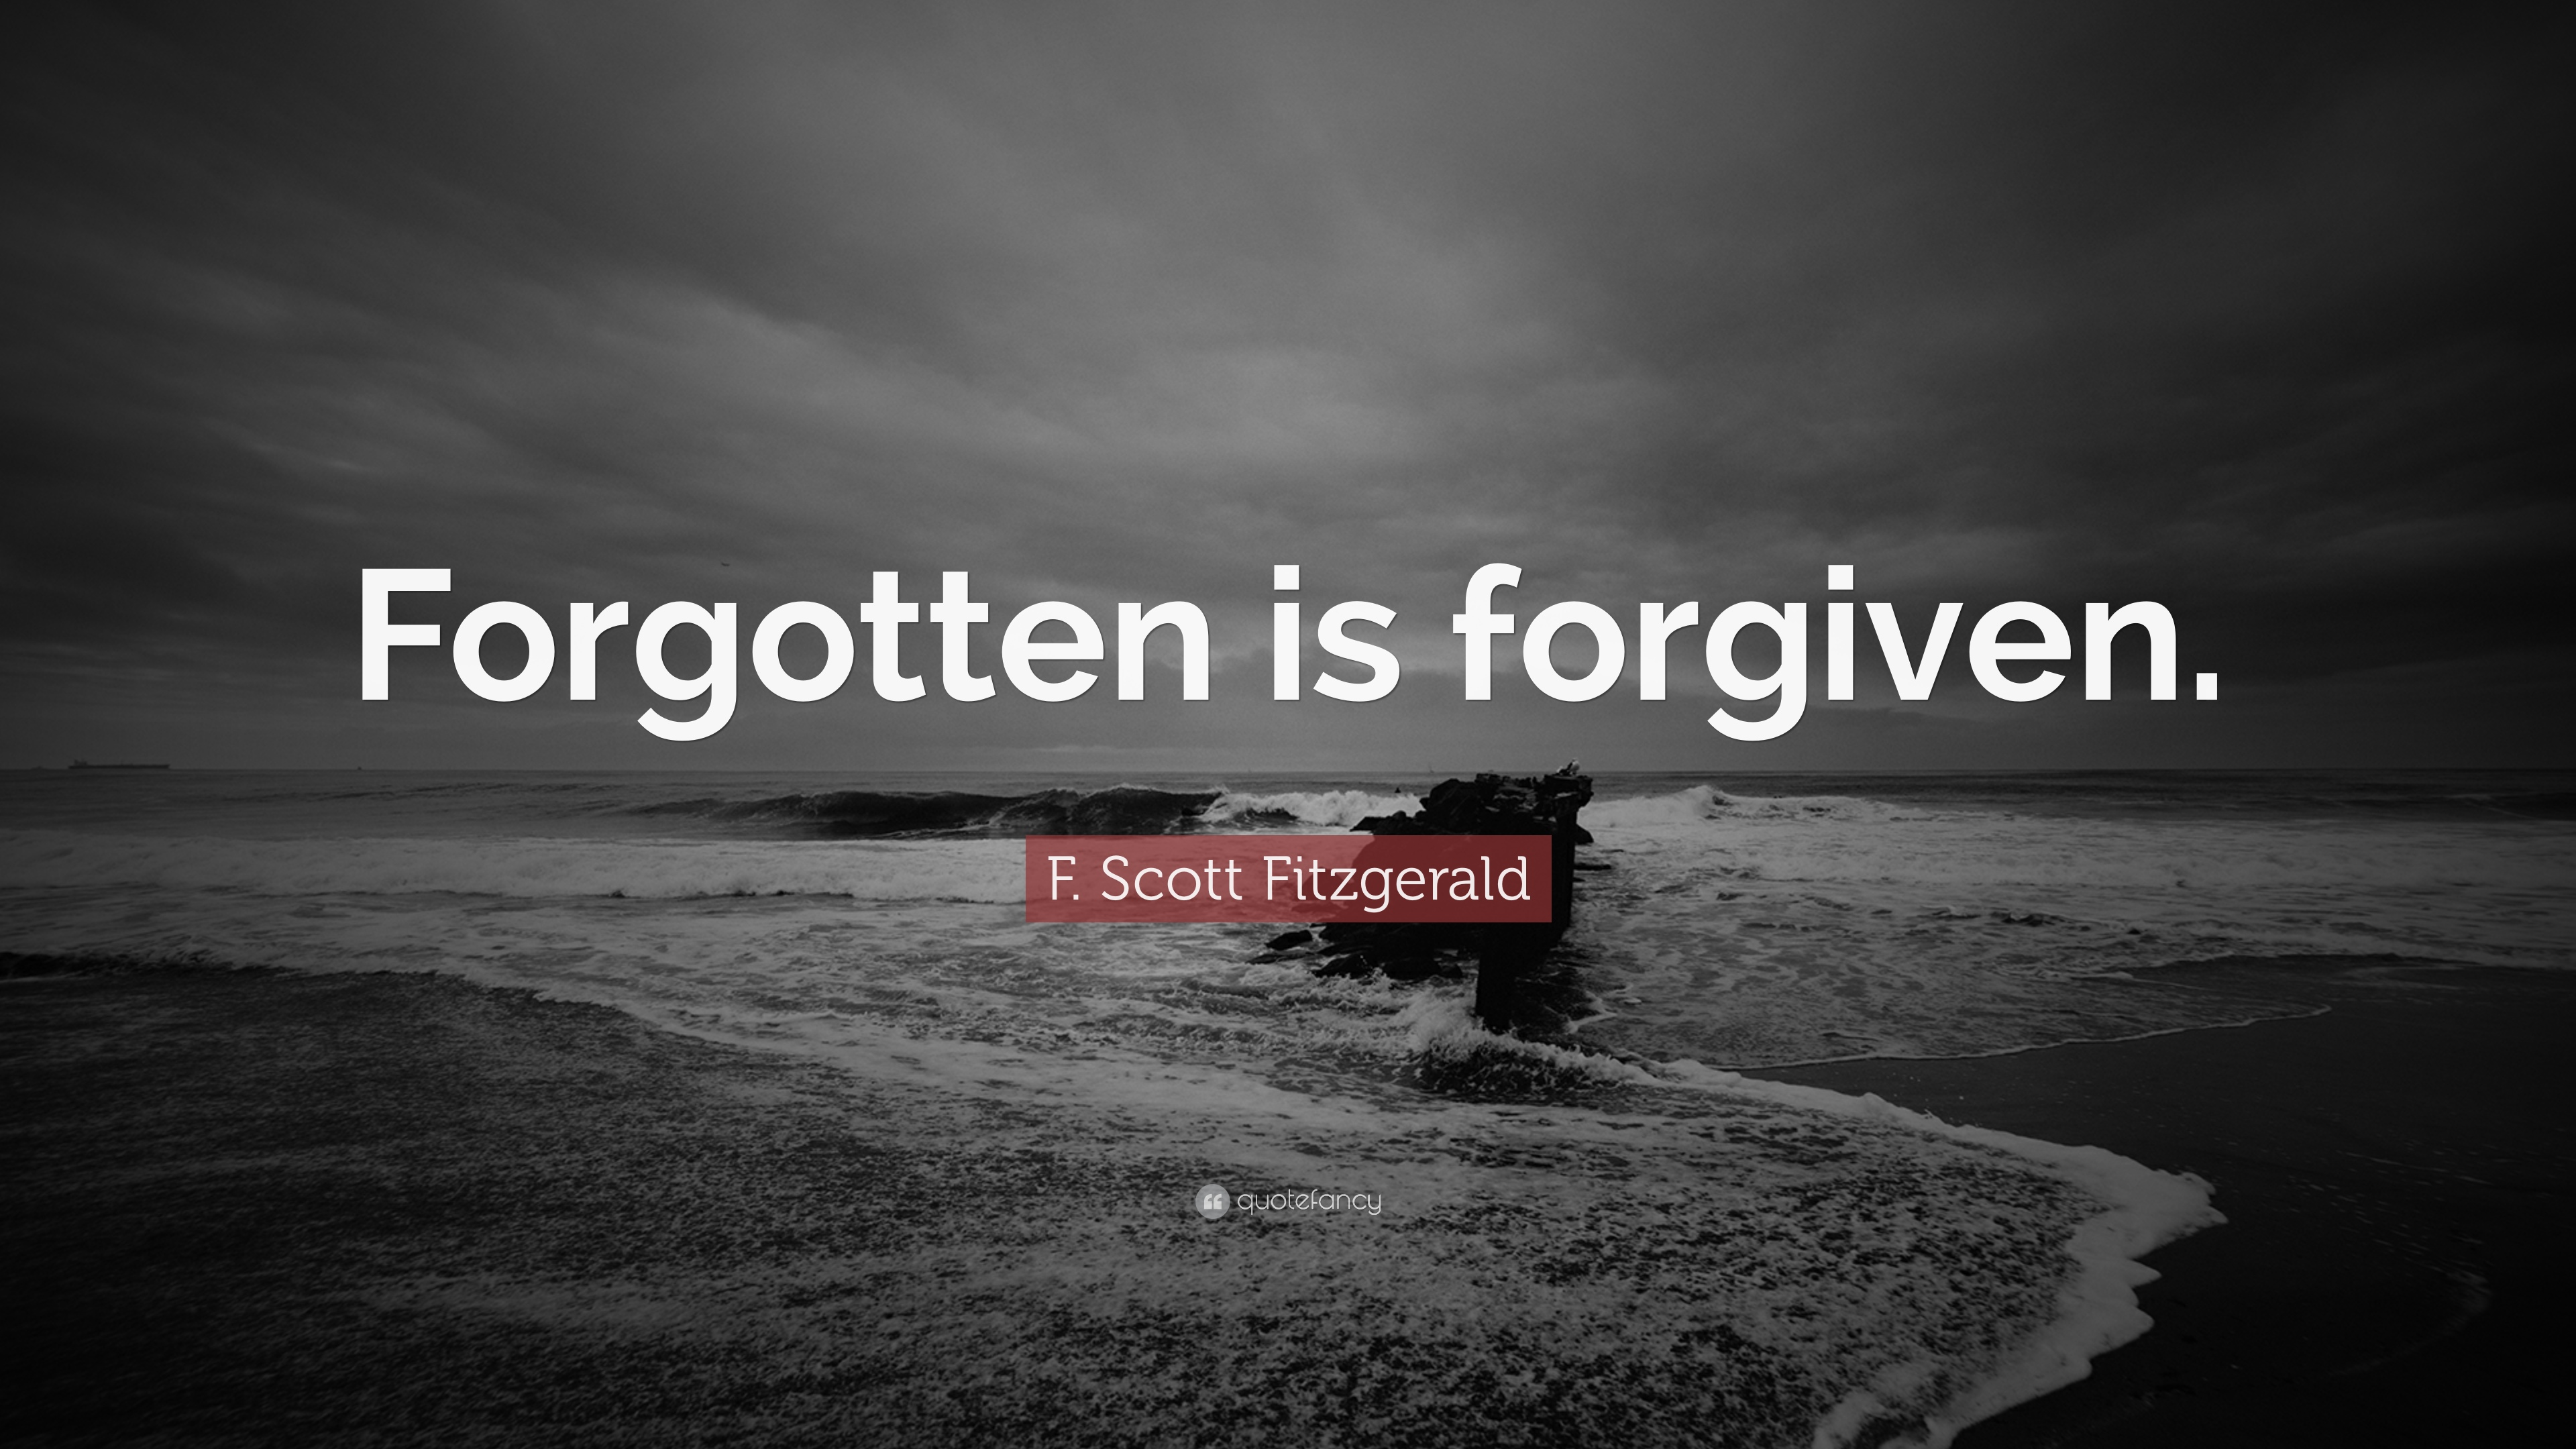 F. Scott Fitzgerald Quote: “Forgotten is forgiven.” (19 wallpapers ...